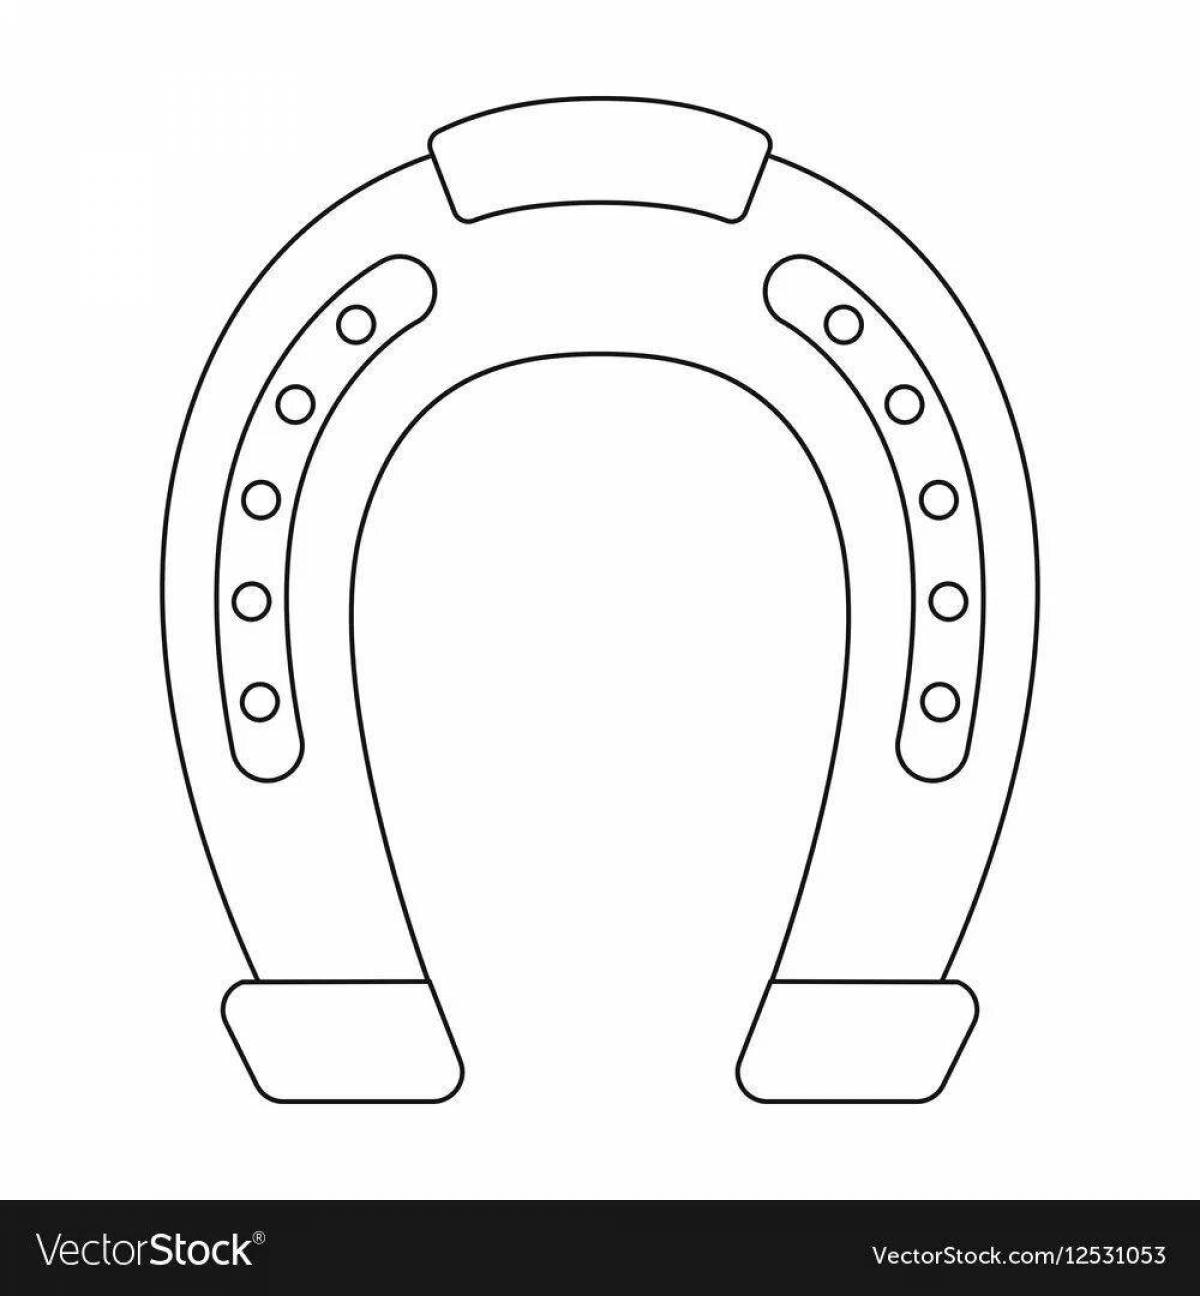 Adorable horseshoe coloring book for kids